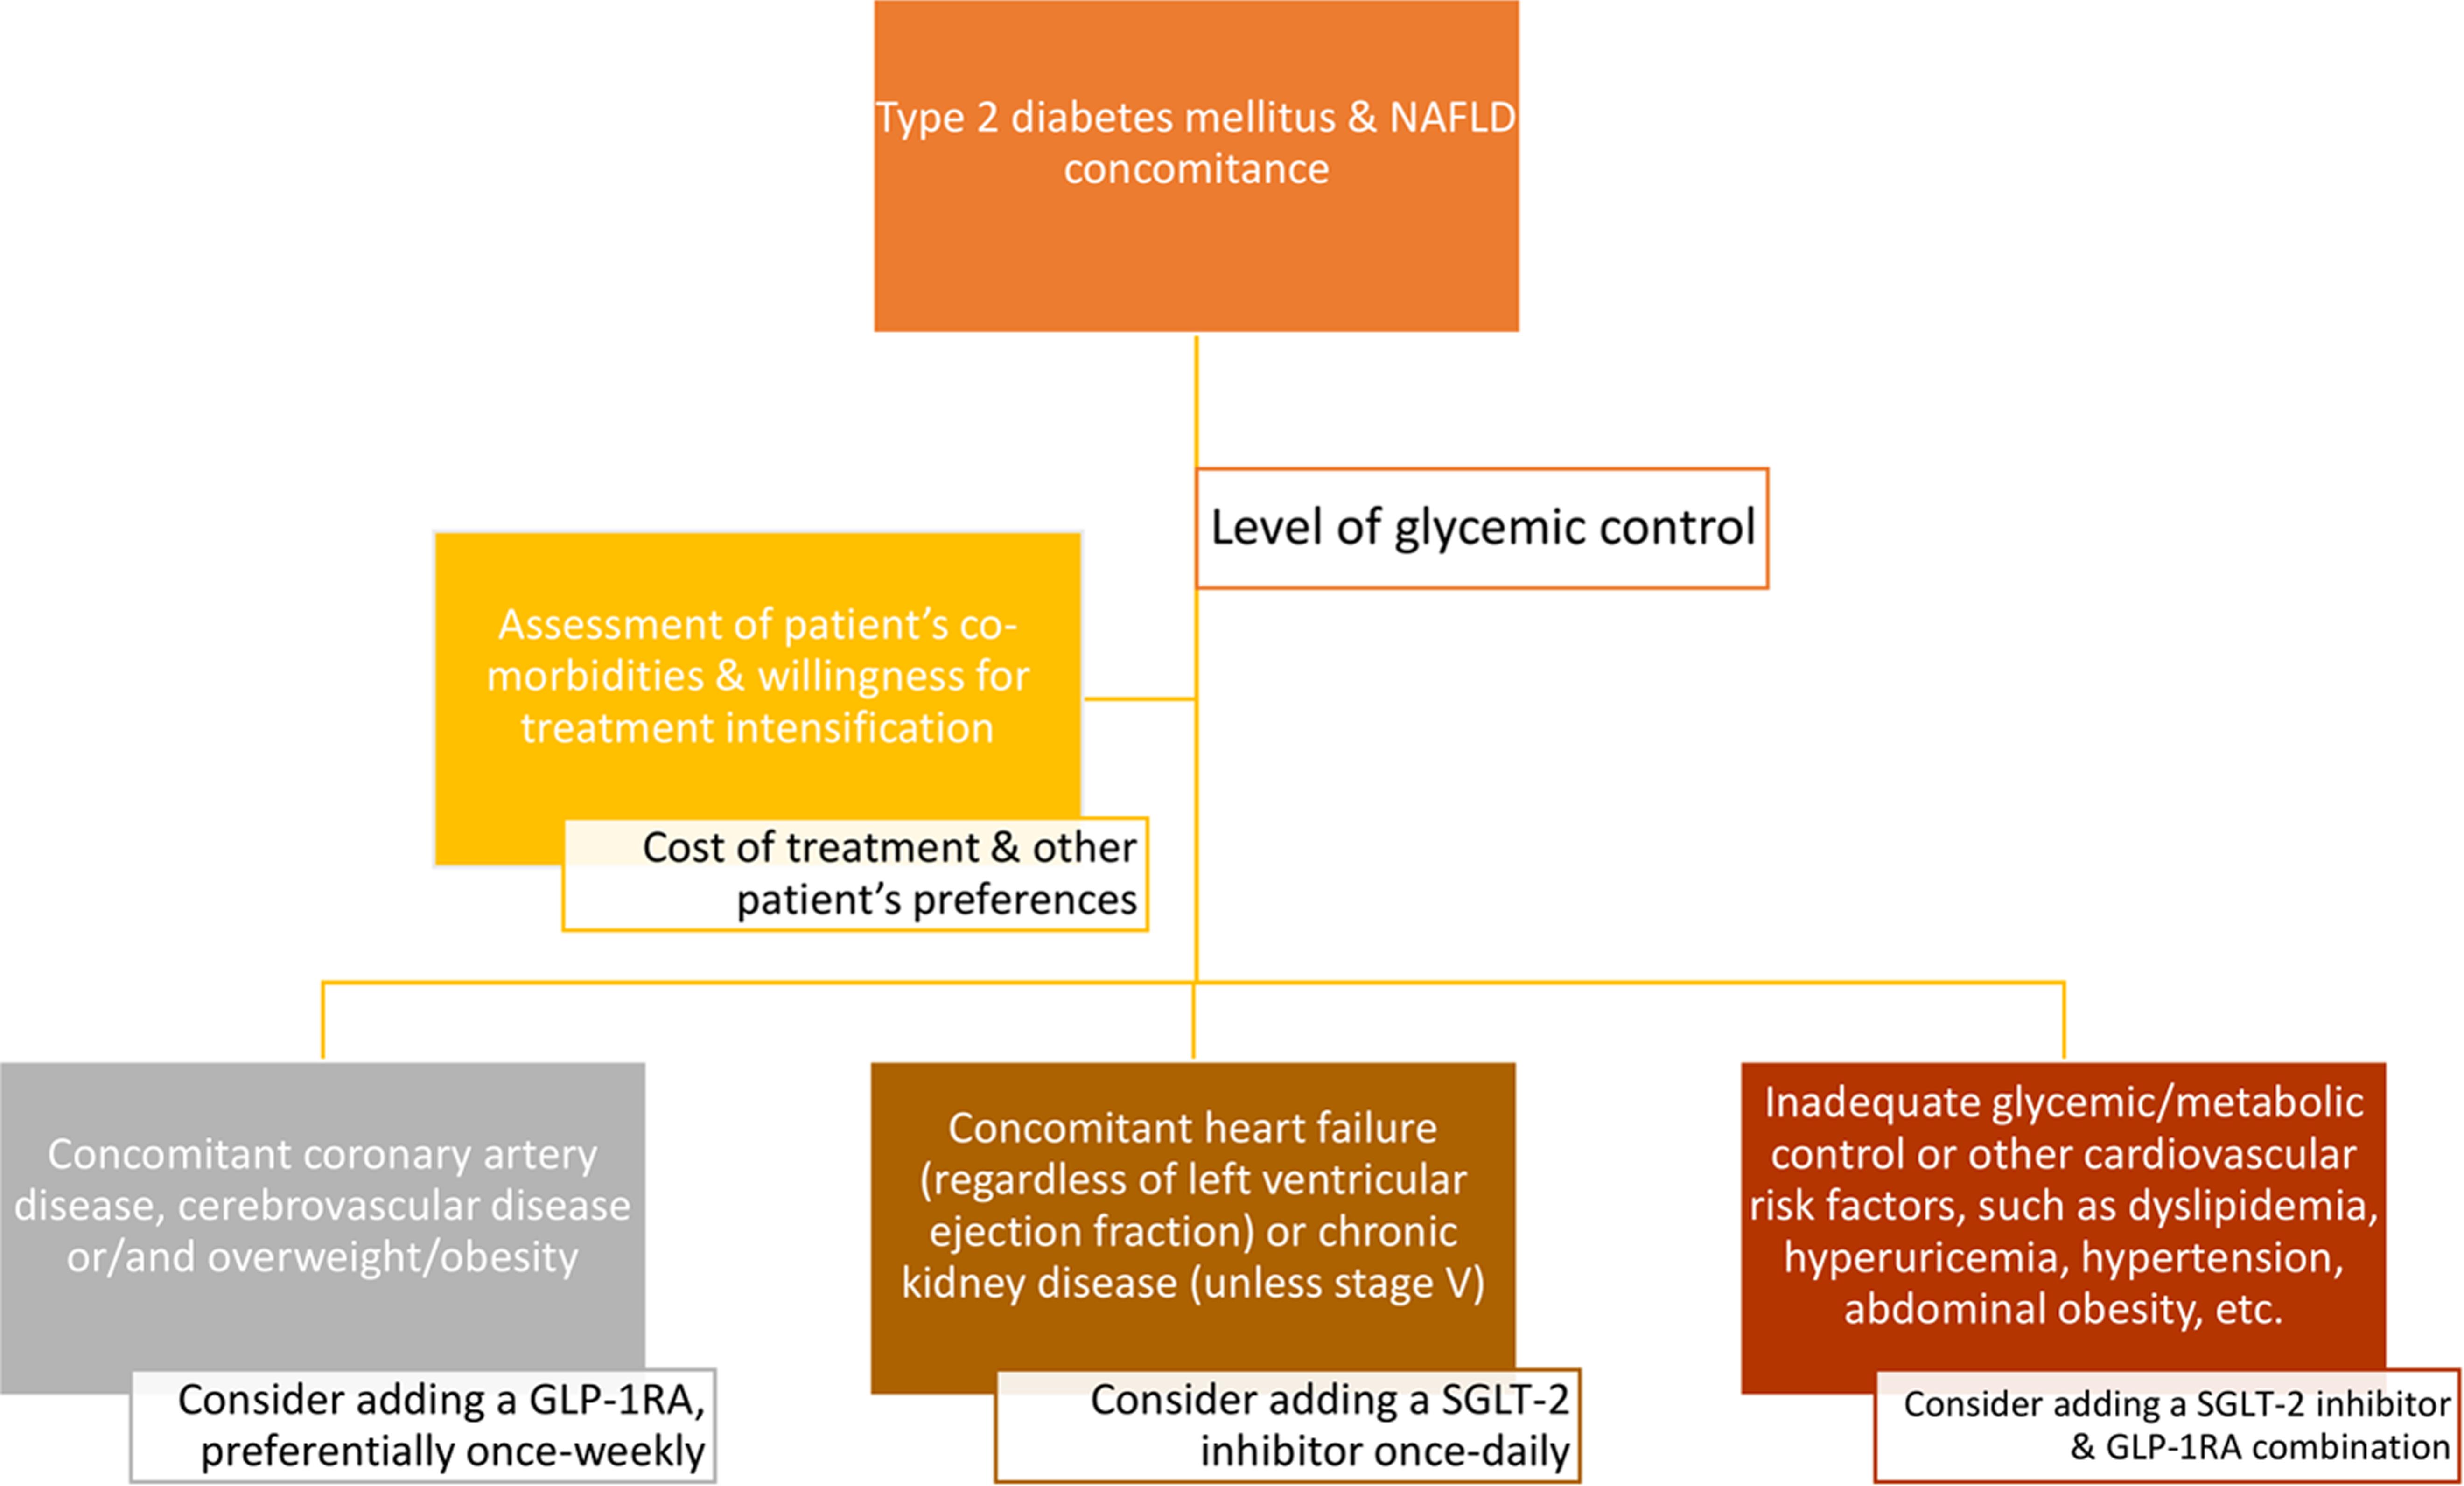 A simplified treatment approach for patients with NAFLD and type 2 diabetes mellitus.